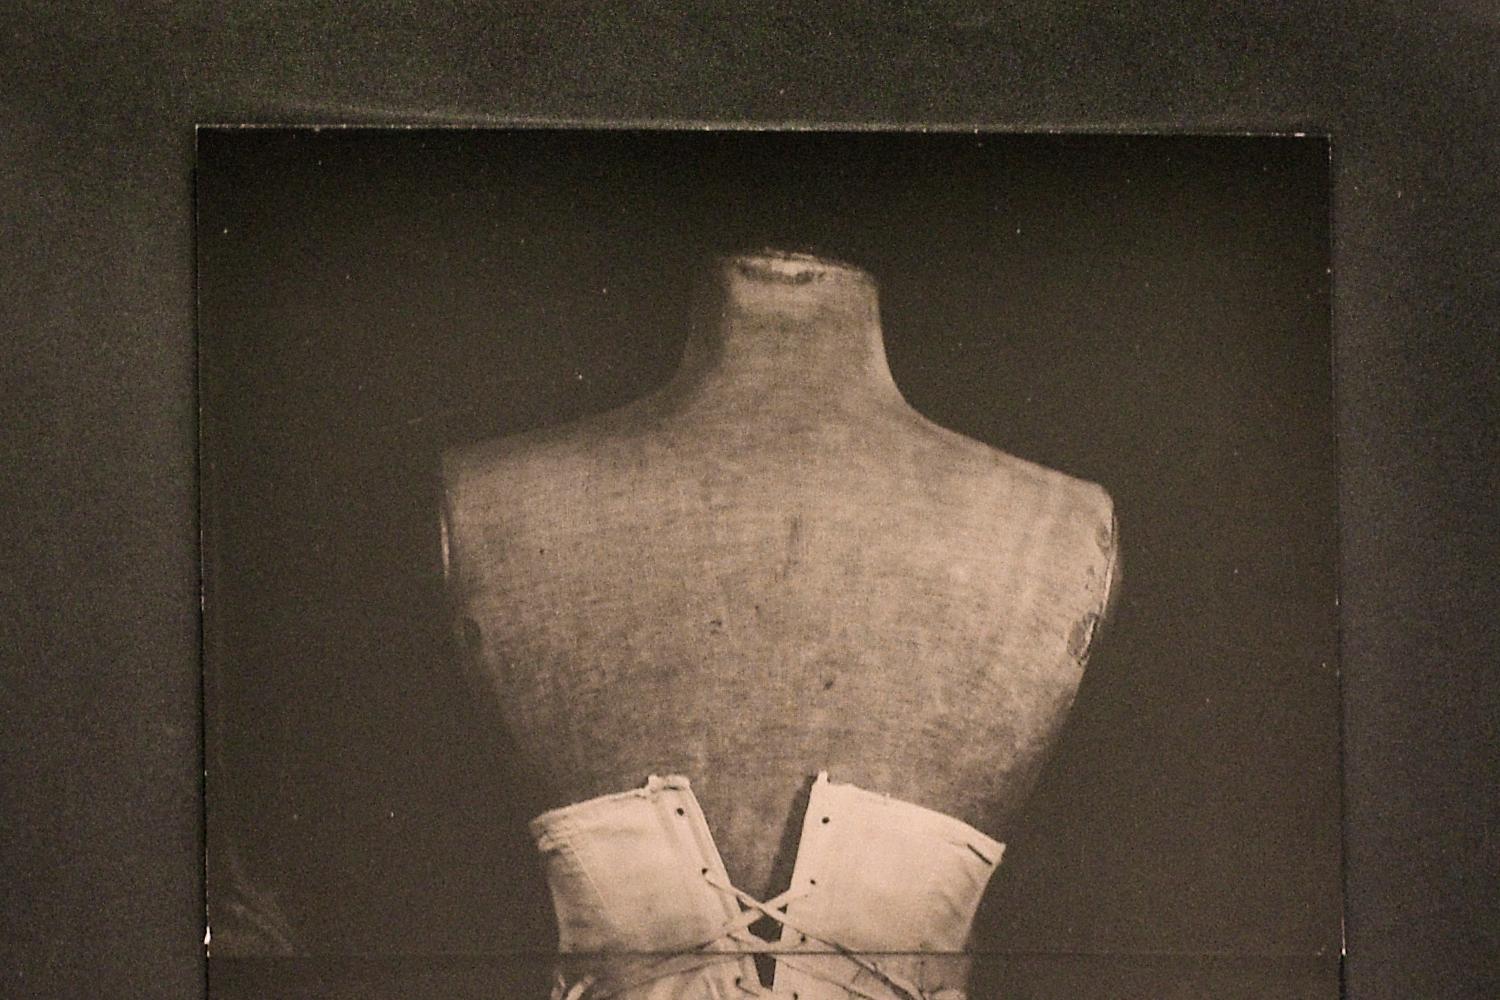 My Grandmother's Corset (Vintage Still Life Photograph of a White Corset) - Black Black and White Photograph by David Sokosh